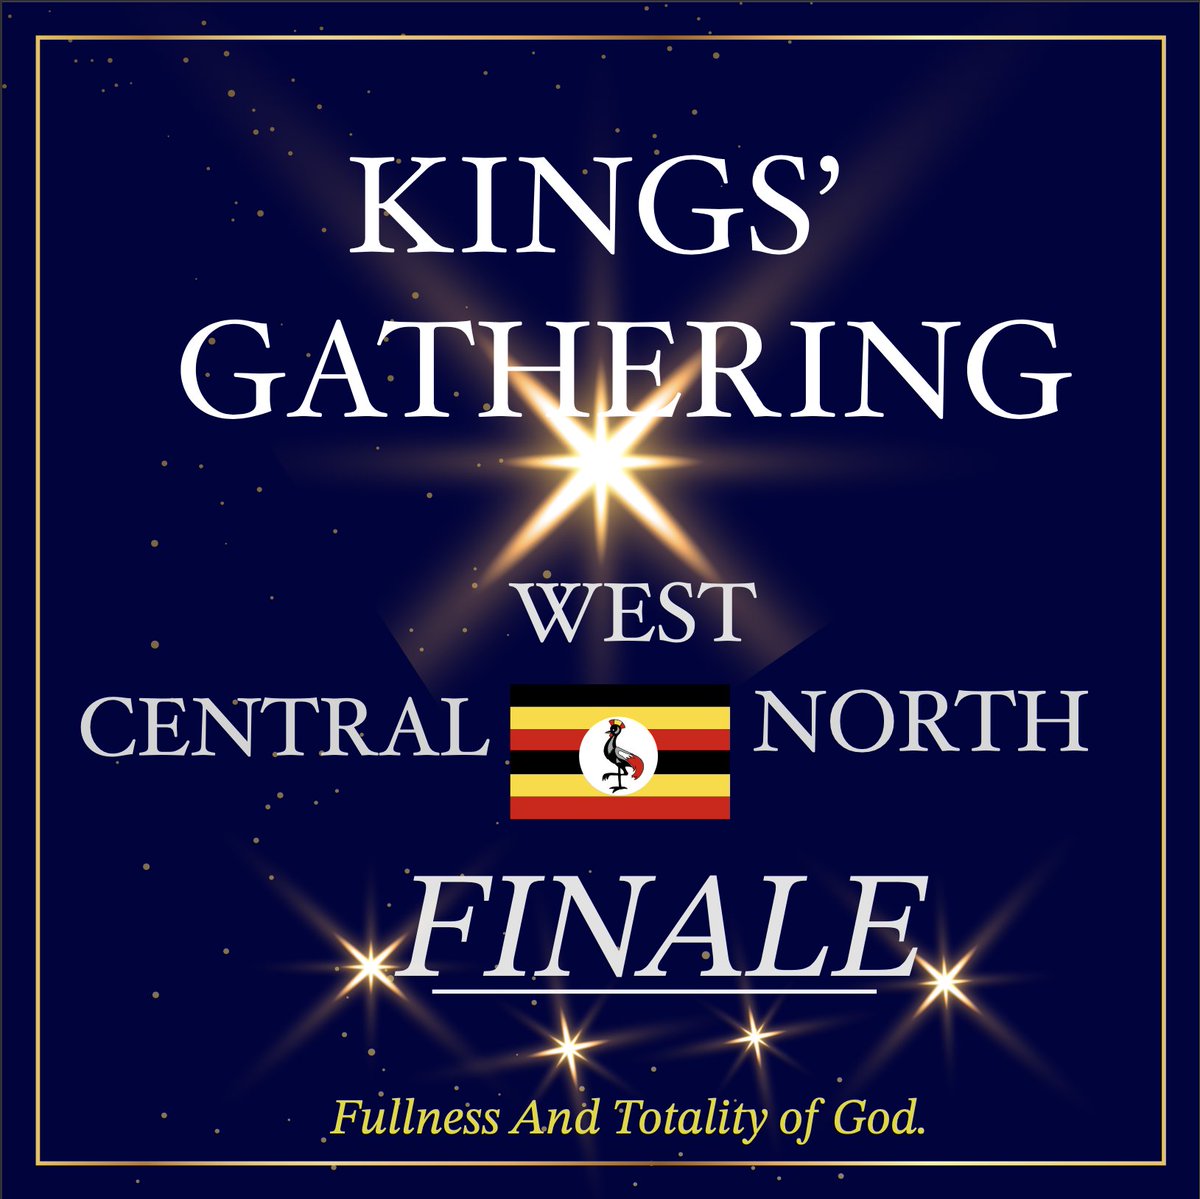 Its a finale come experience unquenchable fire.
#tukamushabafreedom
#unquenchablefire.
#kings